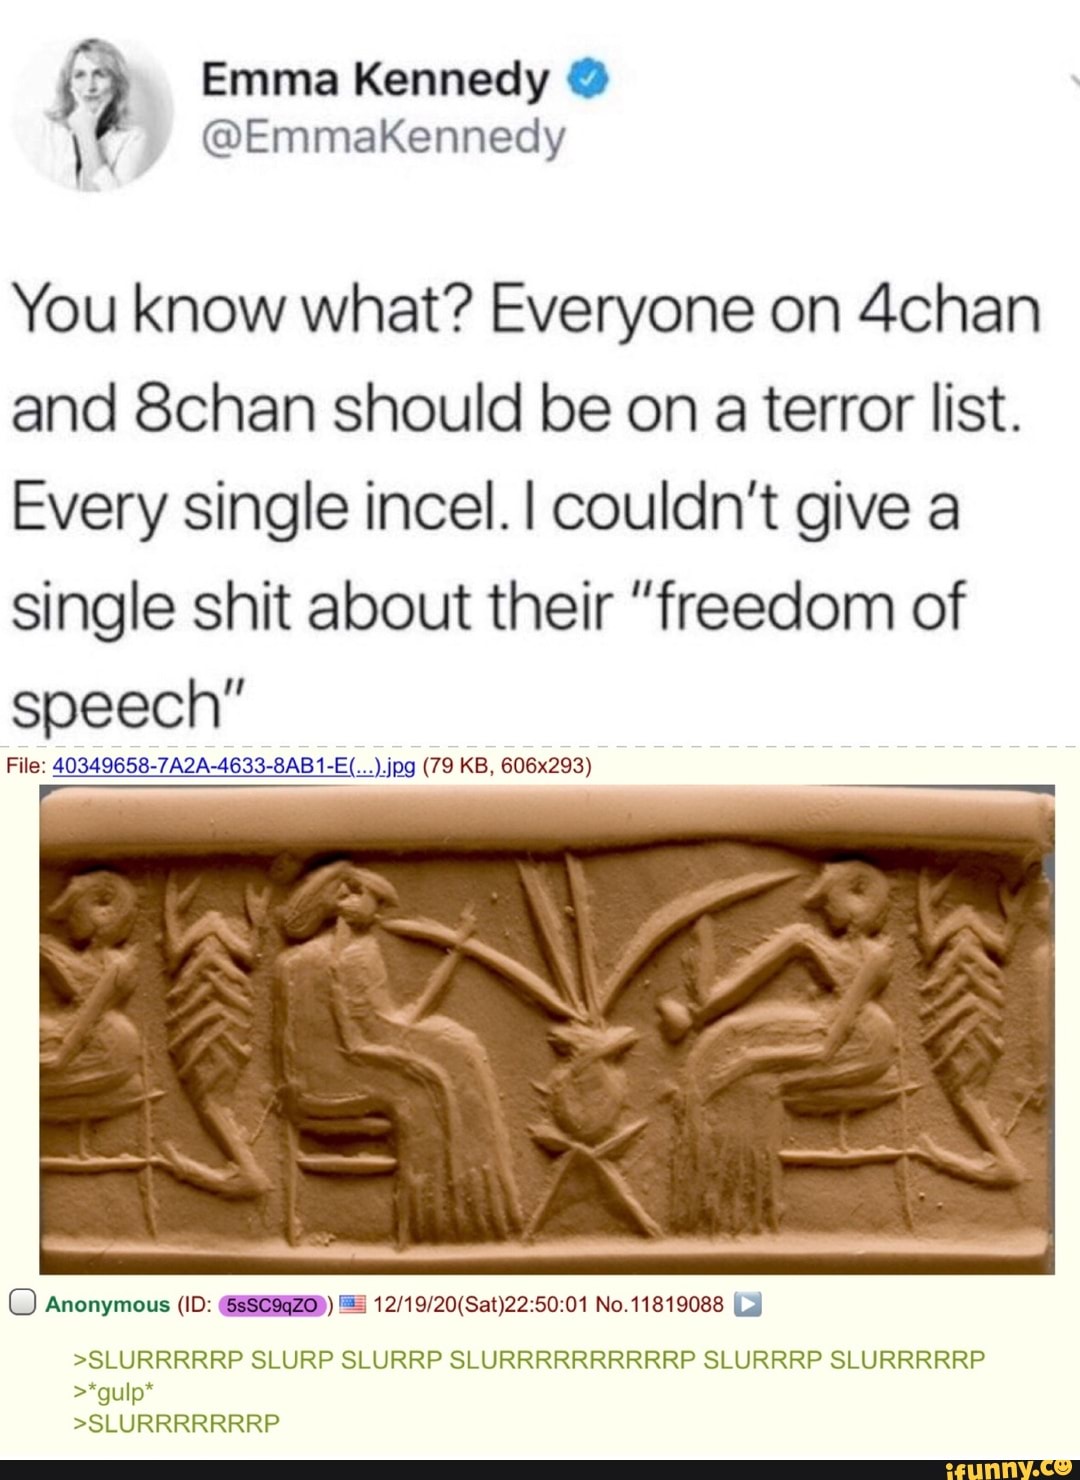 What is the difference between 4chan and 8chan? - Quora